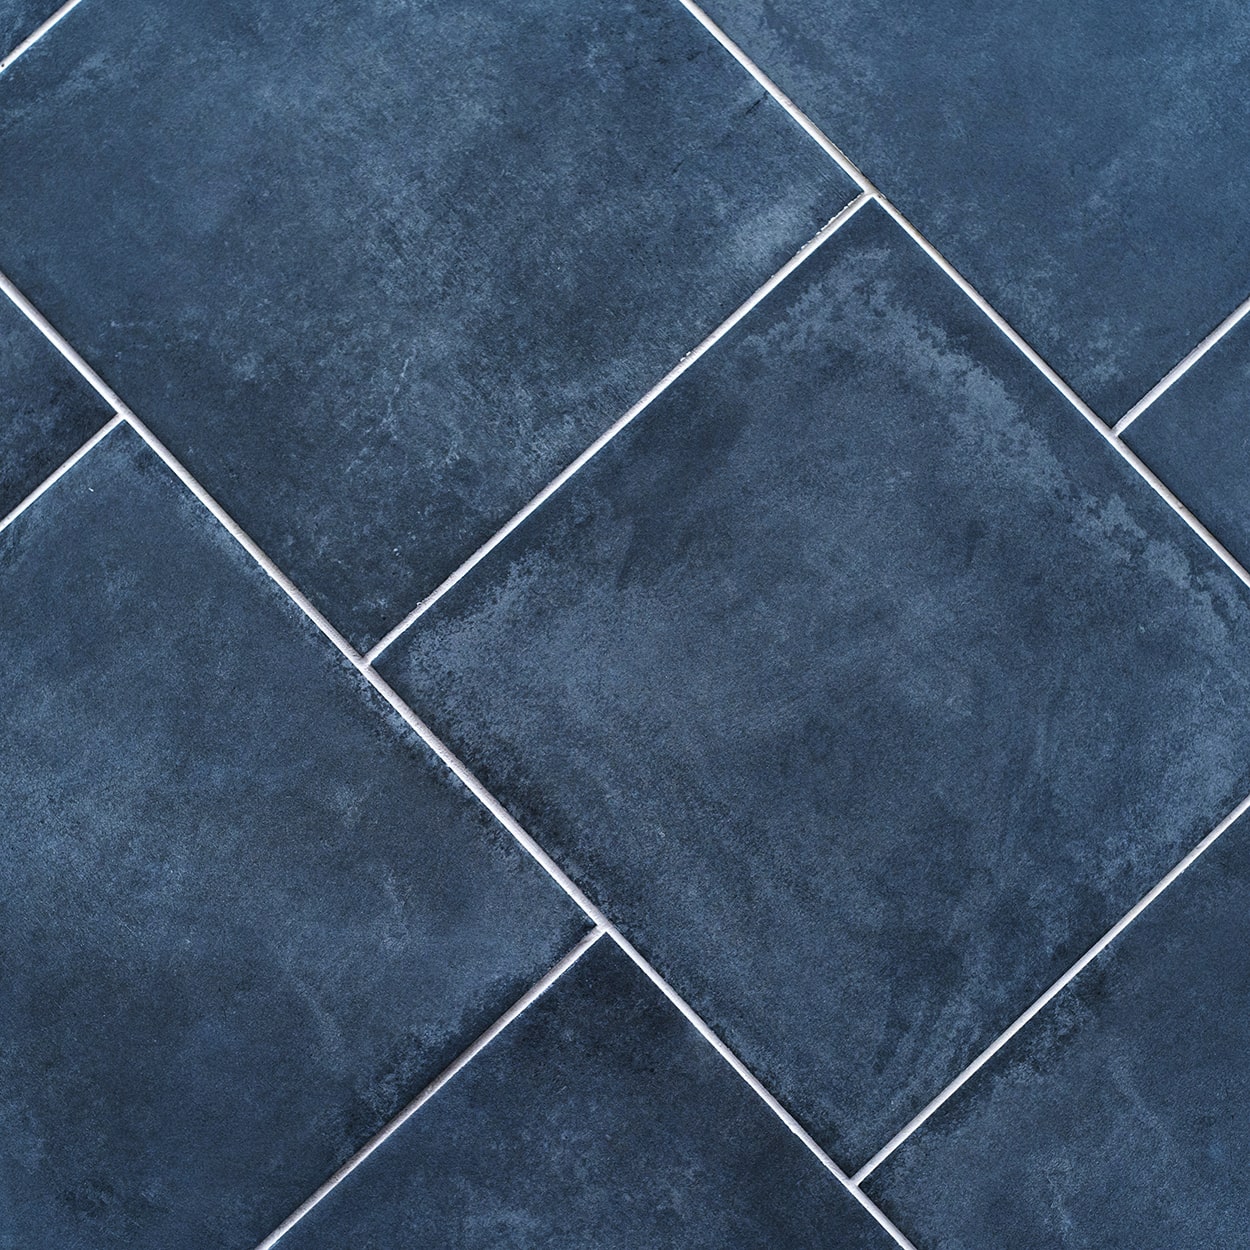 Featured image for “Porcelain vs. Ceramic Tile: What Is The Difference?”